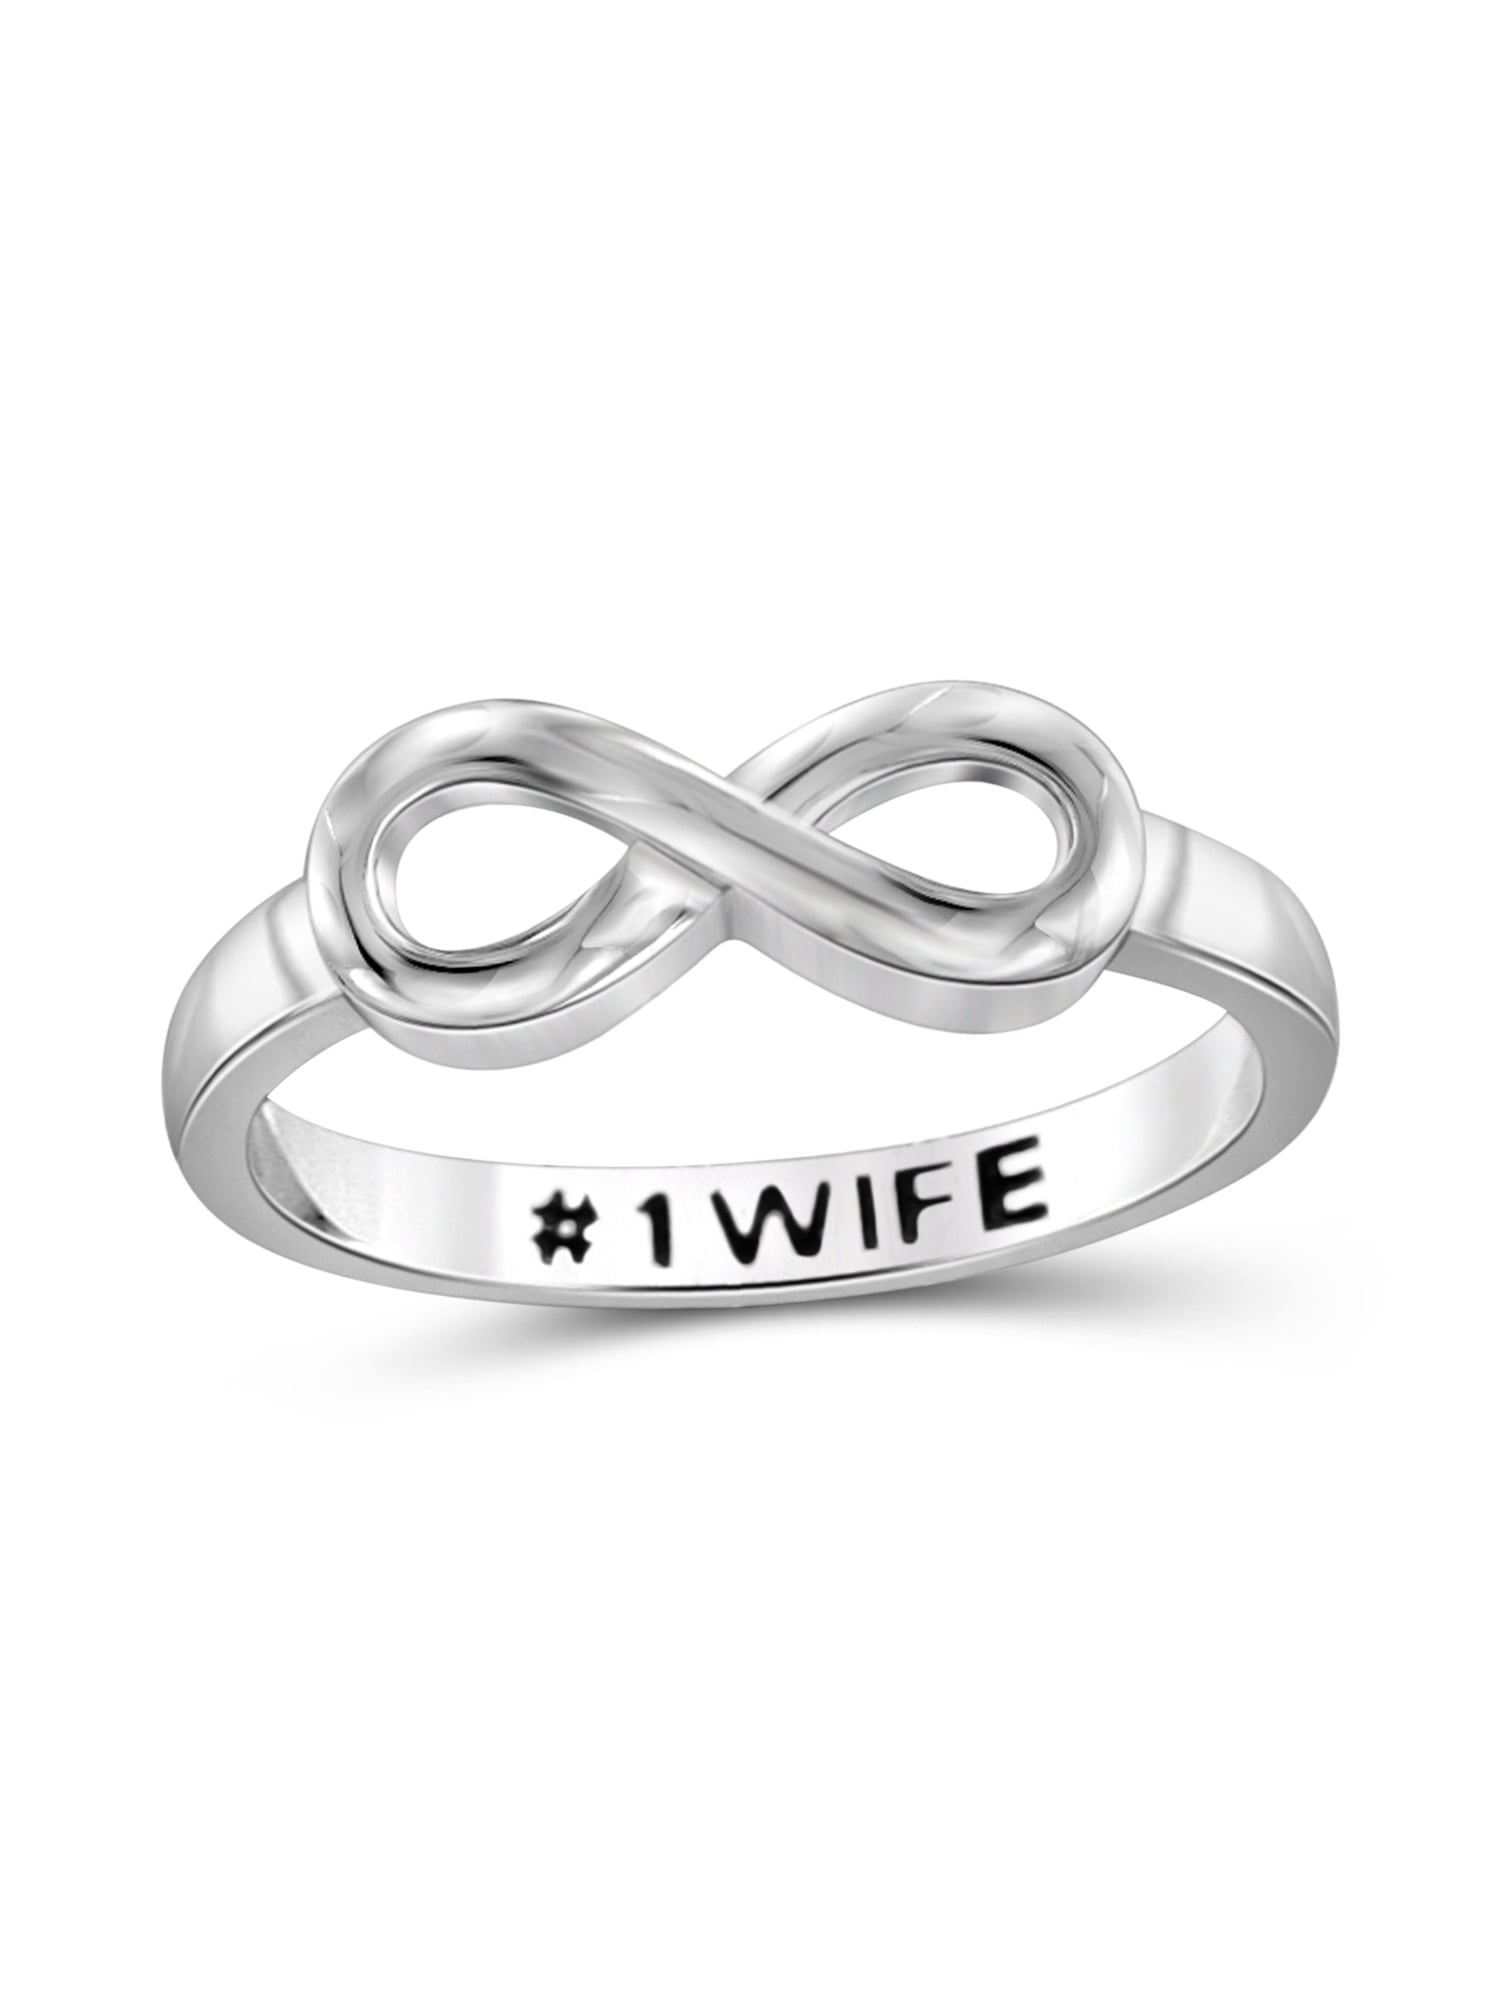 Infinity Heart Promise Rings for Her Sterling Silver Friendship Ring